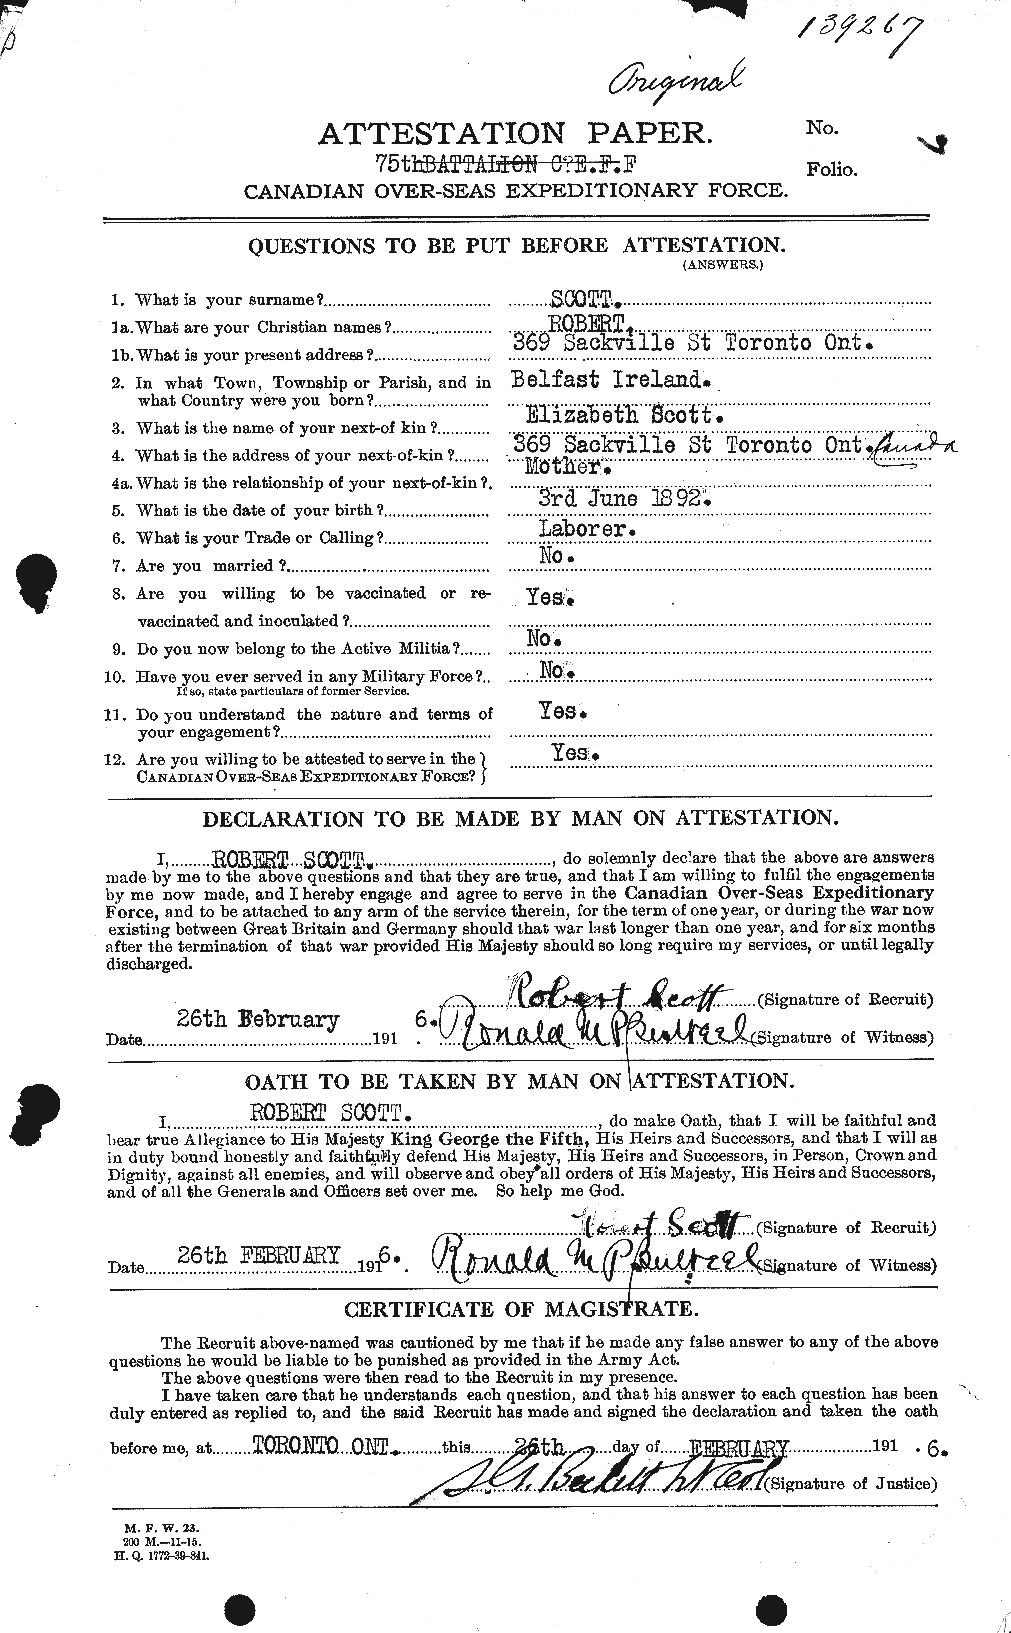 Personnel Records of the First World War - CEF 089245a